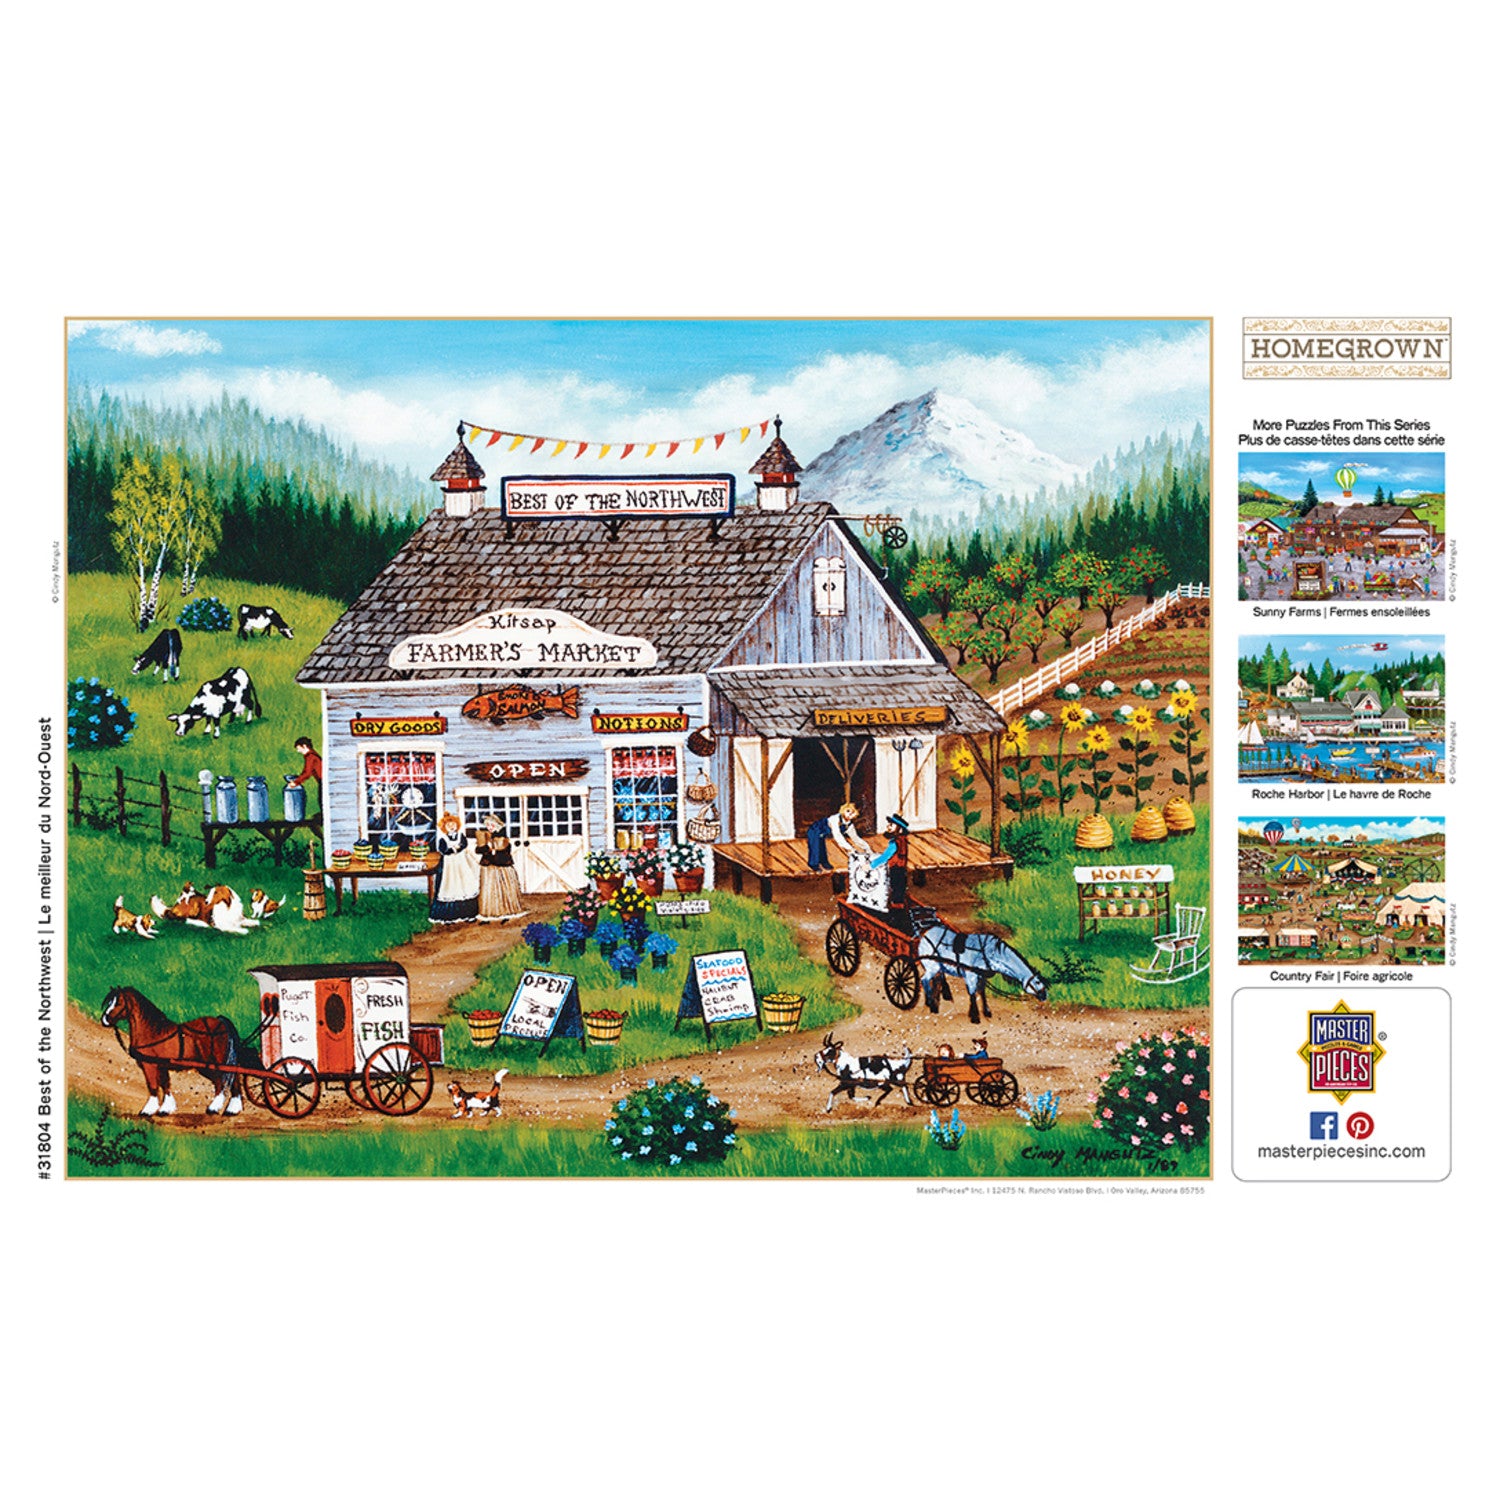 Homegrown - Best of the Northwest 750 Piece Jigsaw Puzzle